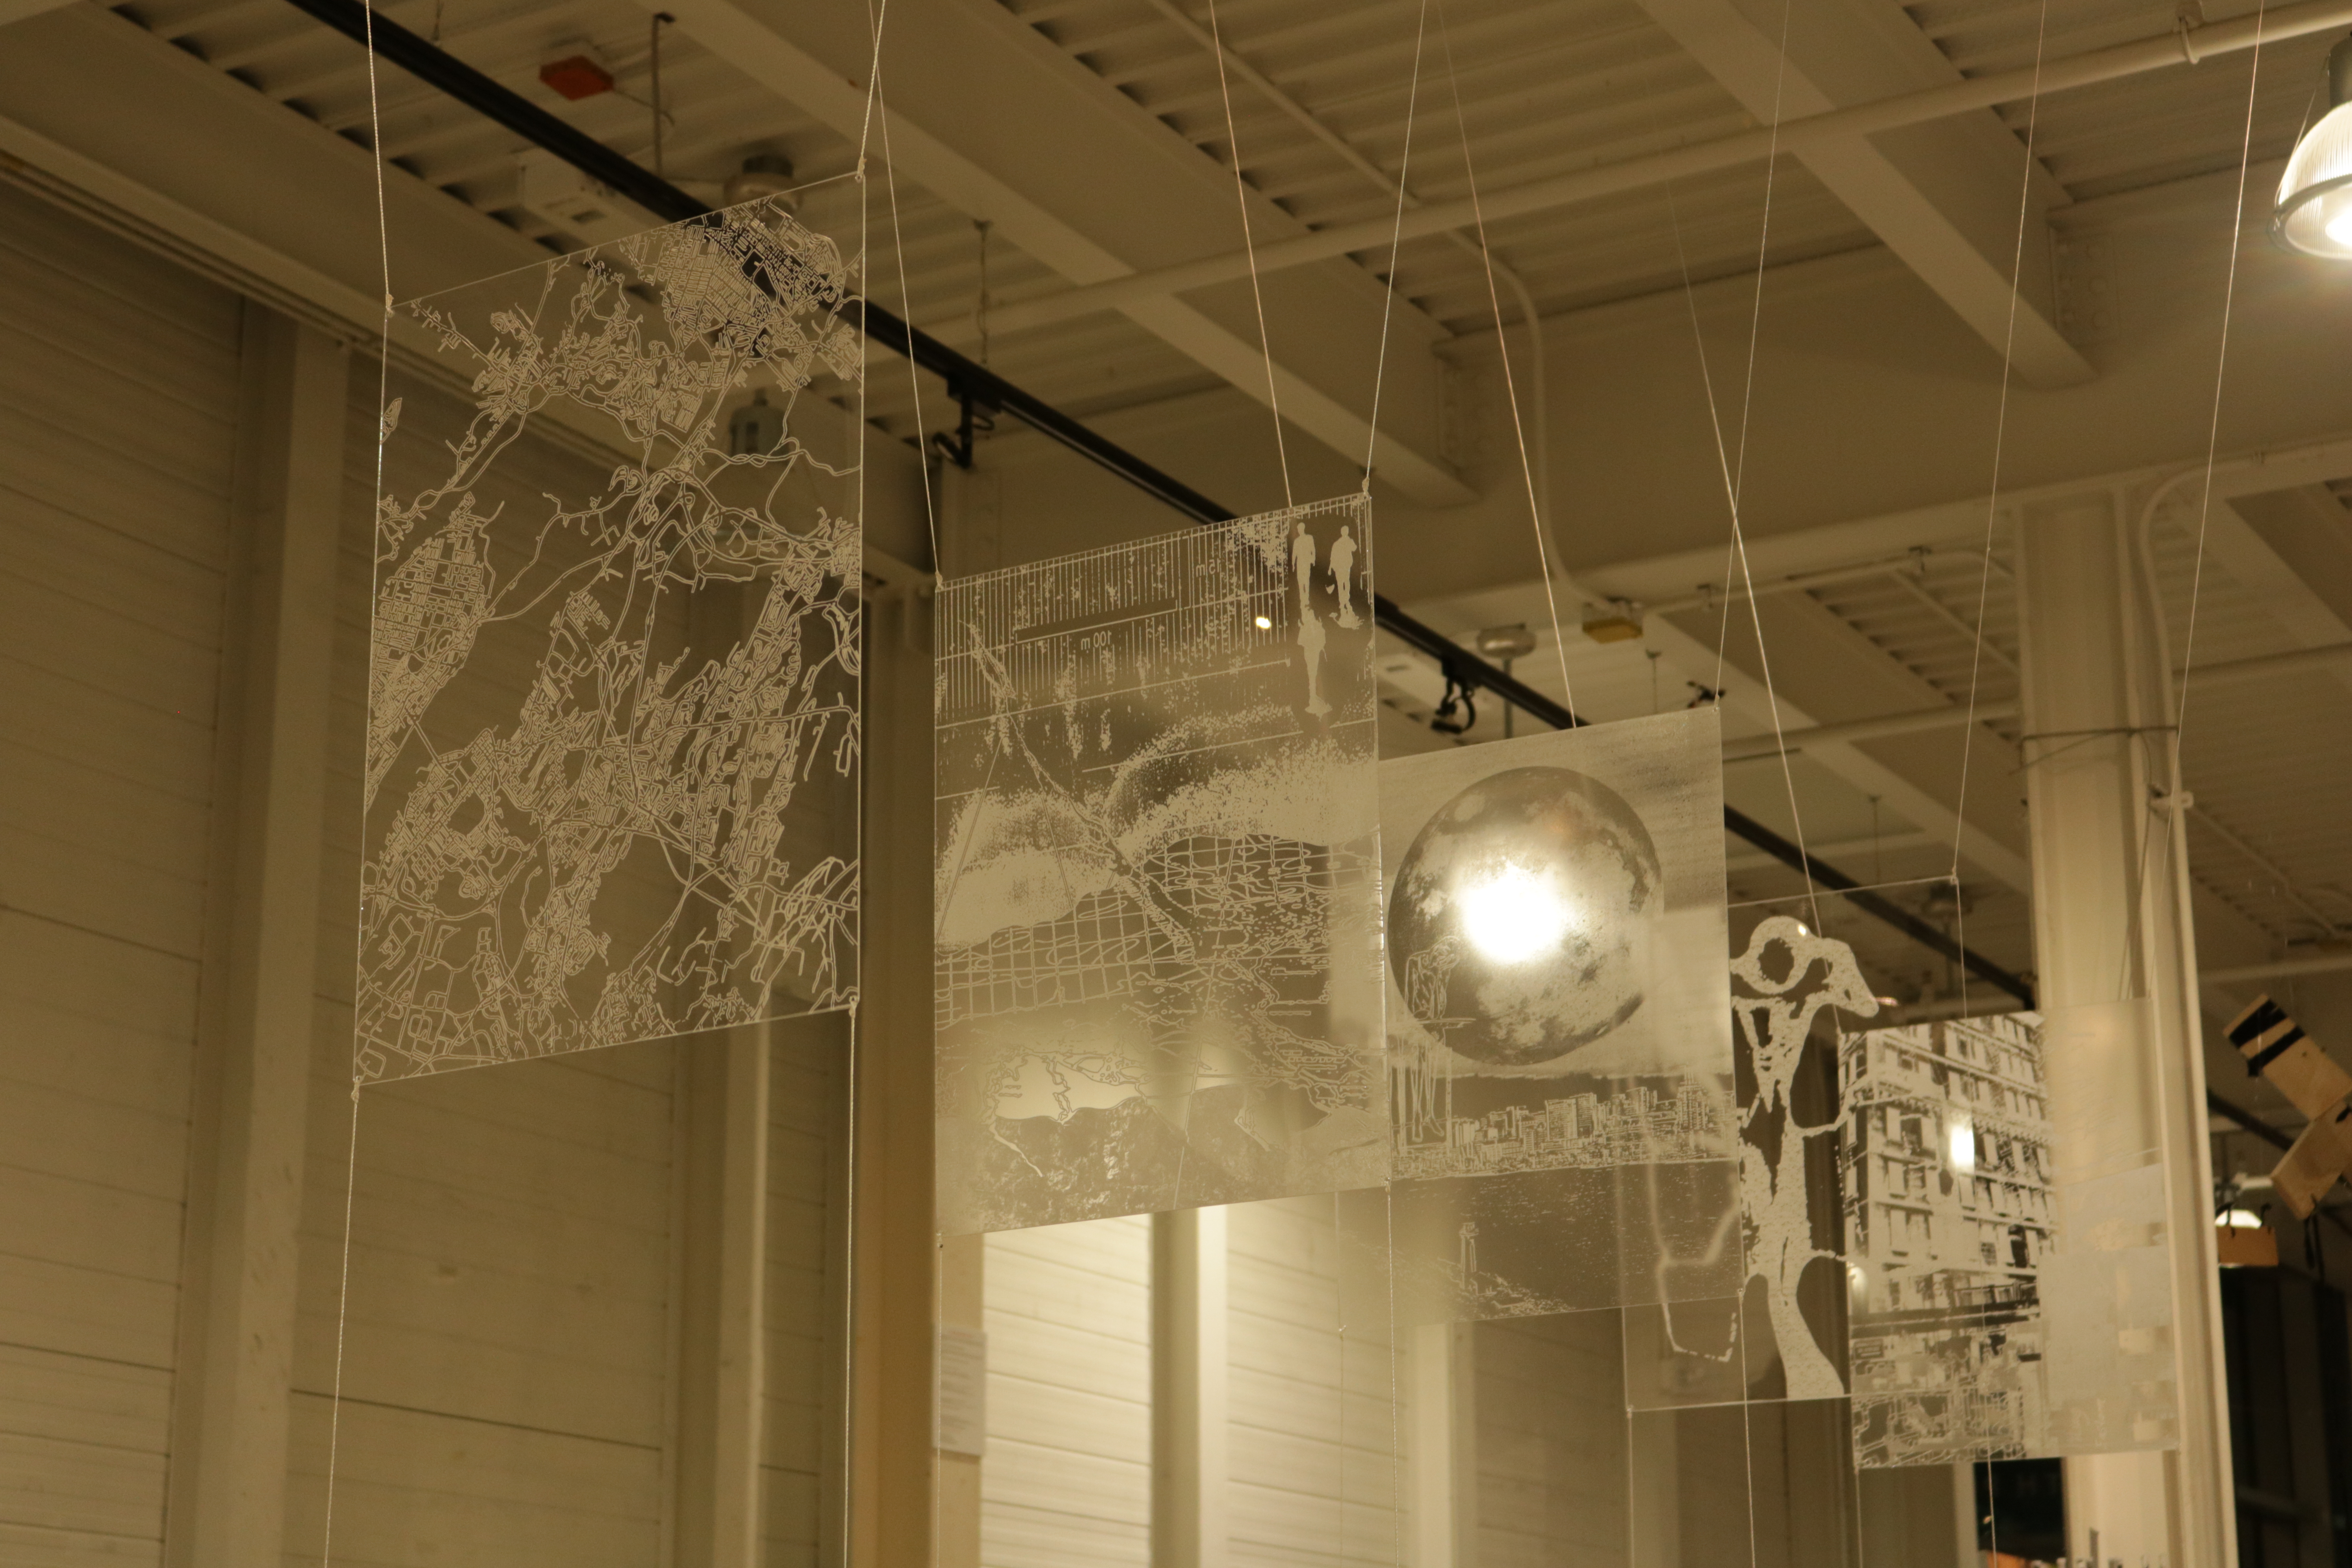 installation view of Visible Cities by Ada Denil at NSCAD University